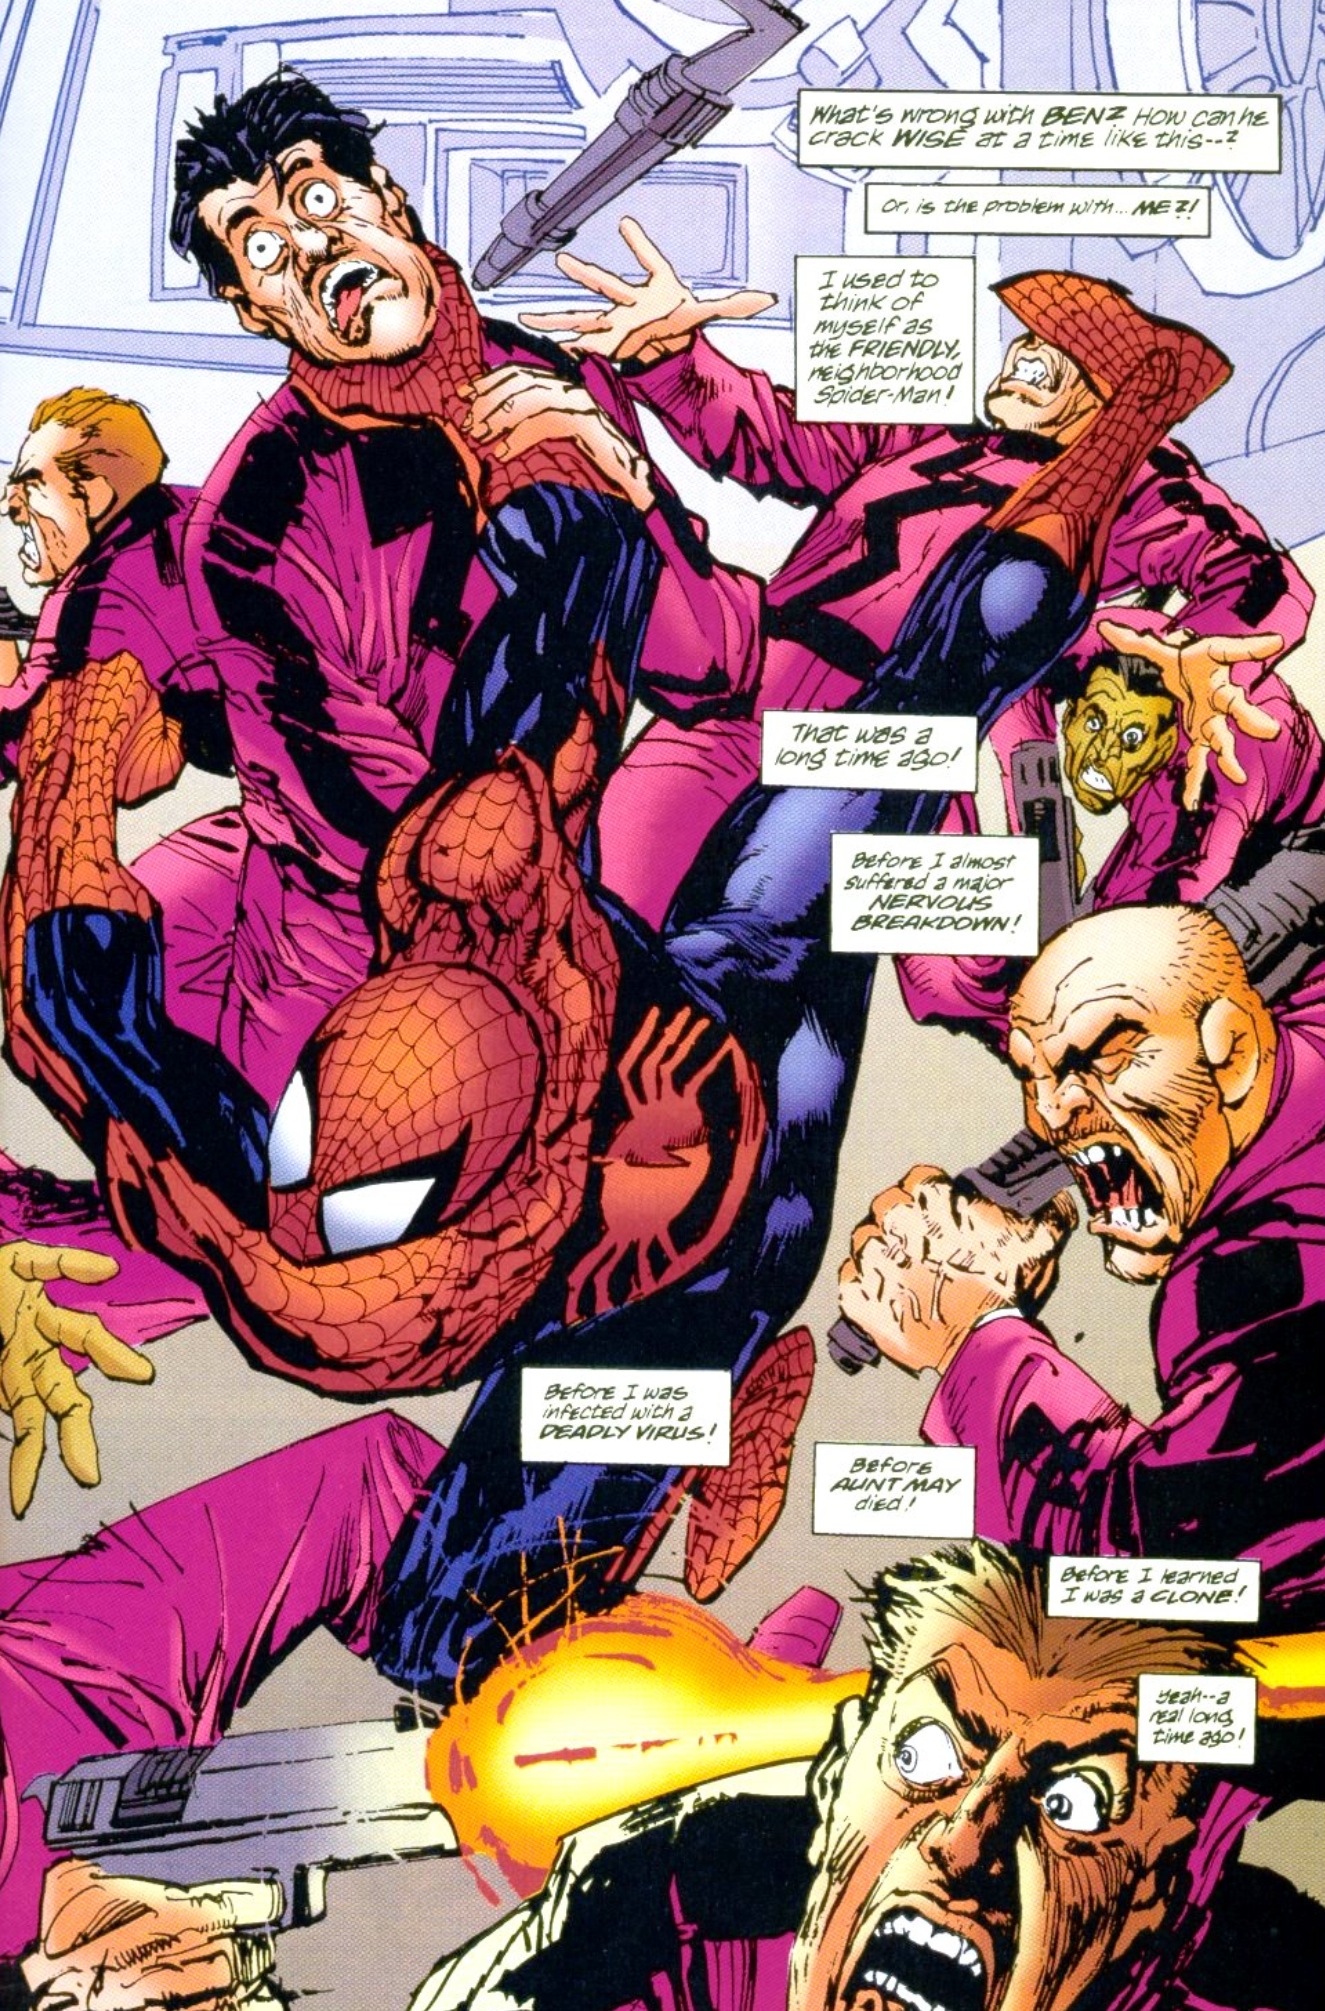 The Day They Walked Away: Spider-Man